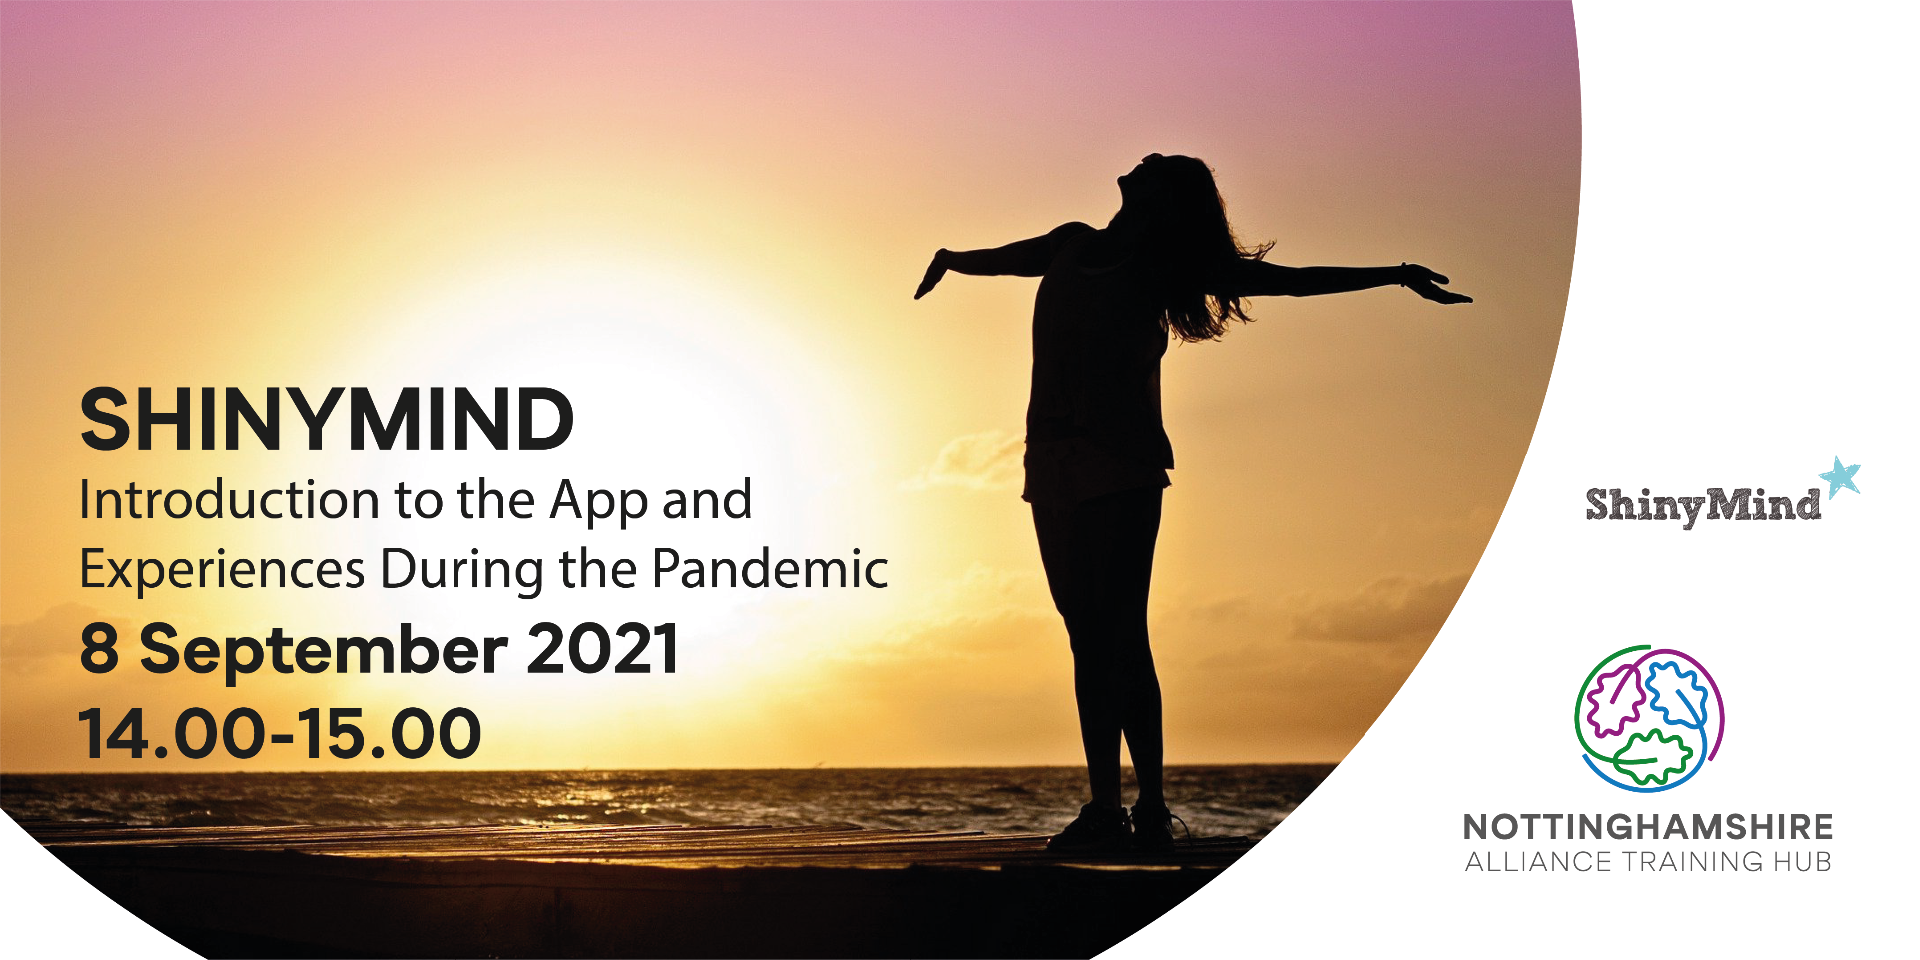 ShinyMind - Introduction to the app and experiences during the pandemic, 8 September 2021, 14.00-15.00